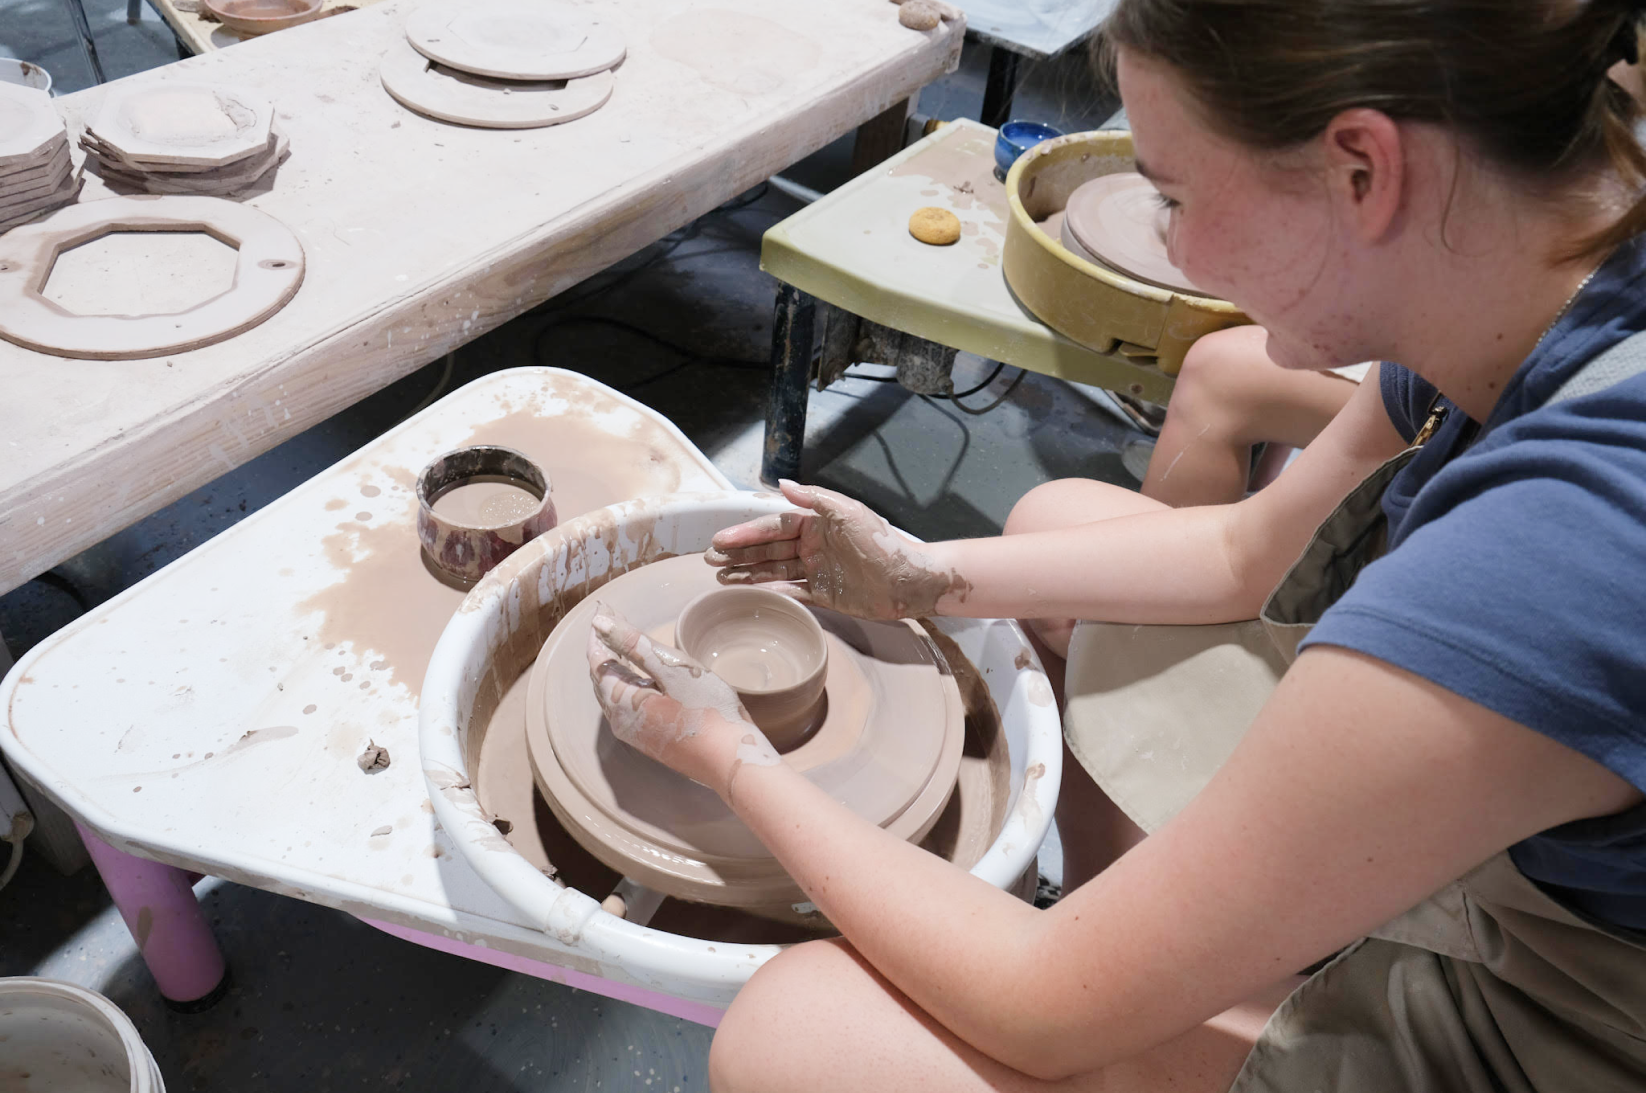 Great date night experience for first time introduction to pottery throwing with the pottery wheel and clay. Learn to use the pottery wheel, center clay and make a bowl, cup or plate.   Participants will be given two hours to play with clay.  BYOB.

BYOB – Glasses provided.  It is rumored that Patrick Swayze will be joining us too.